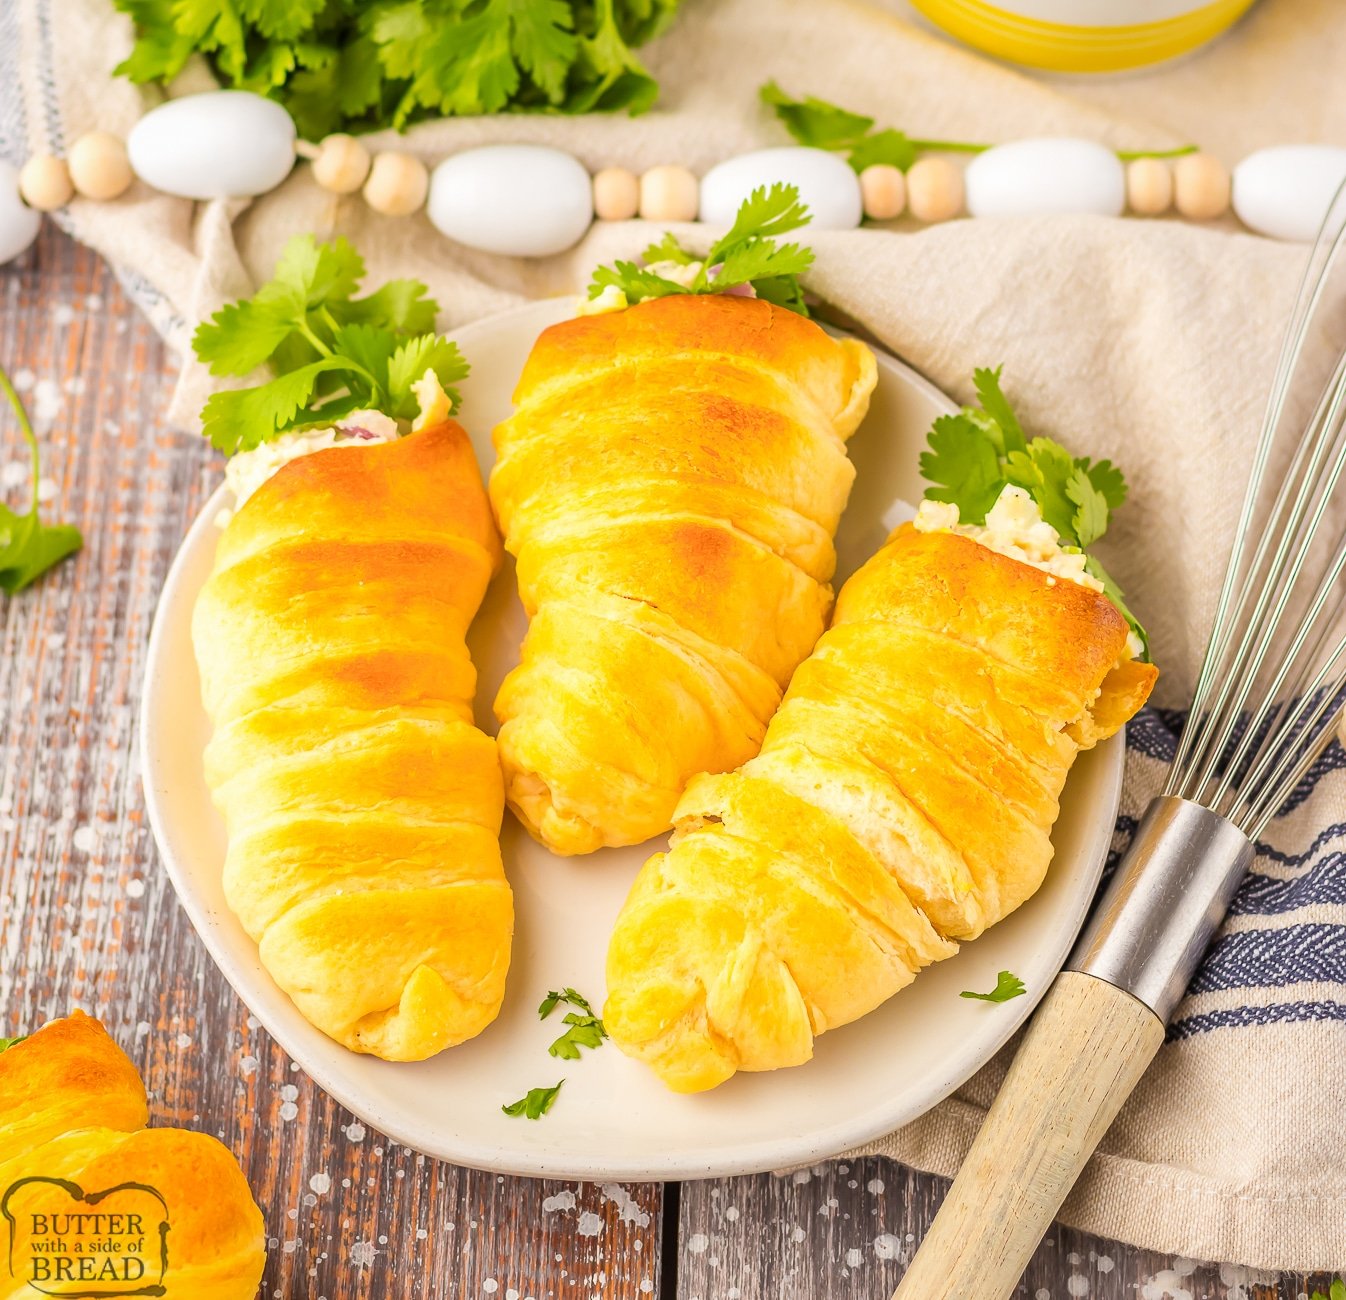 carrot shaped crescent rolls filled with chicken salad